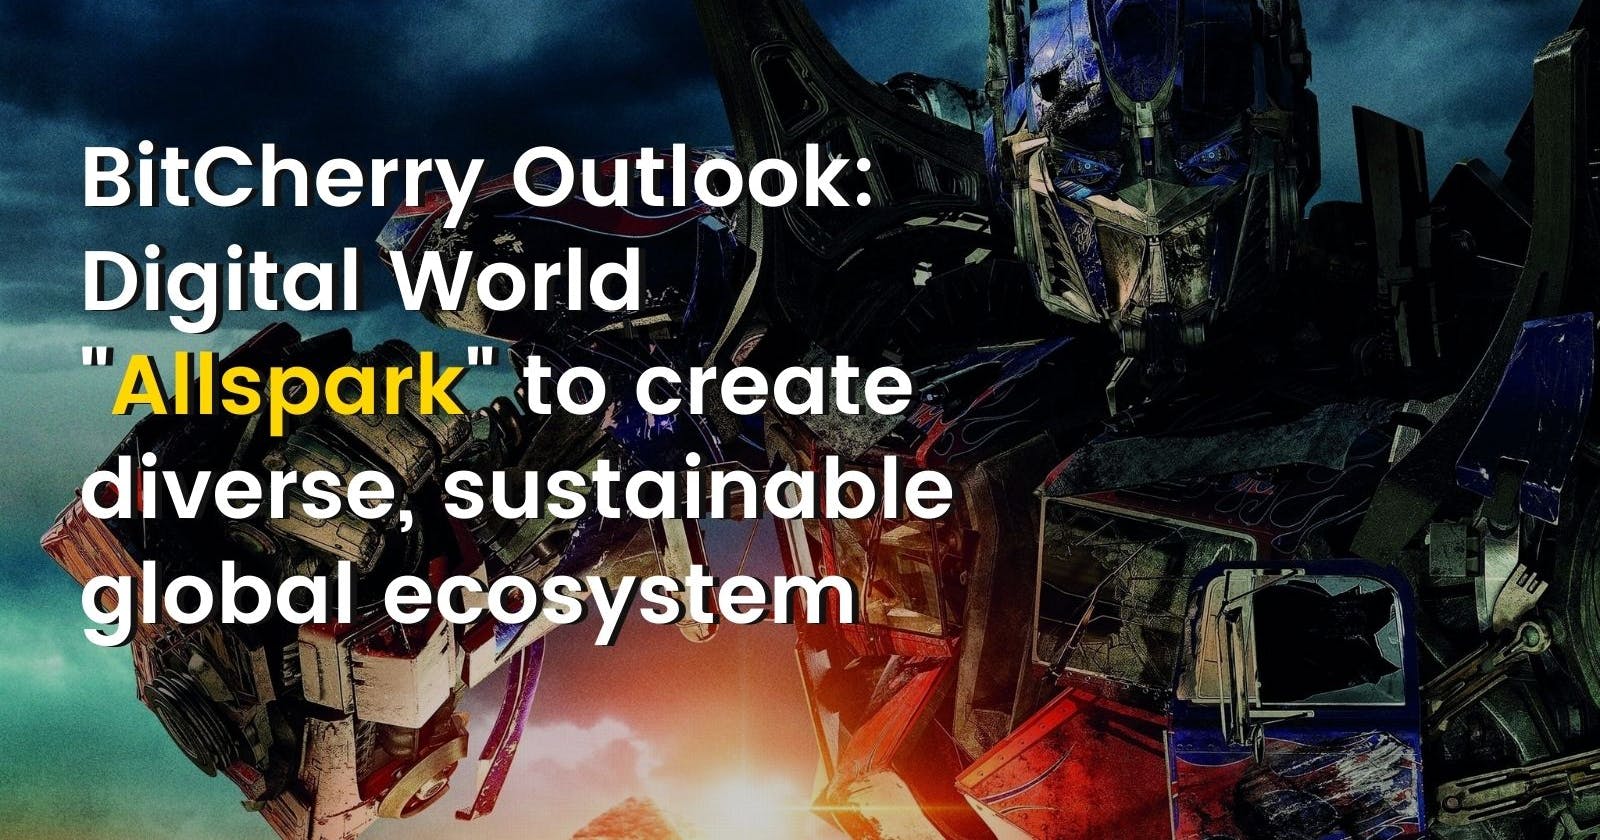 BitCherry Outlook: Digital World "Allspark" to create diverse, sustainable global ecosystem